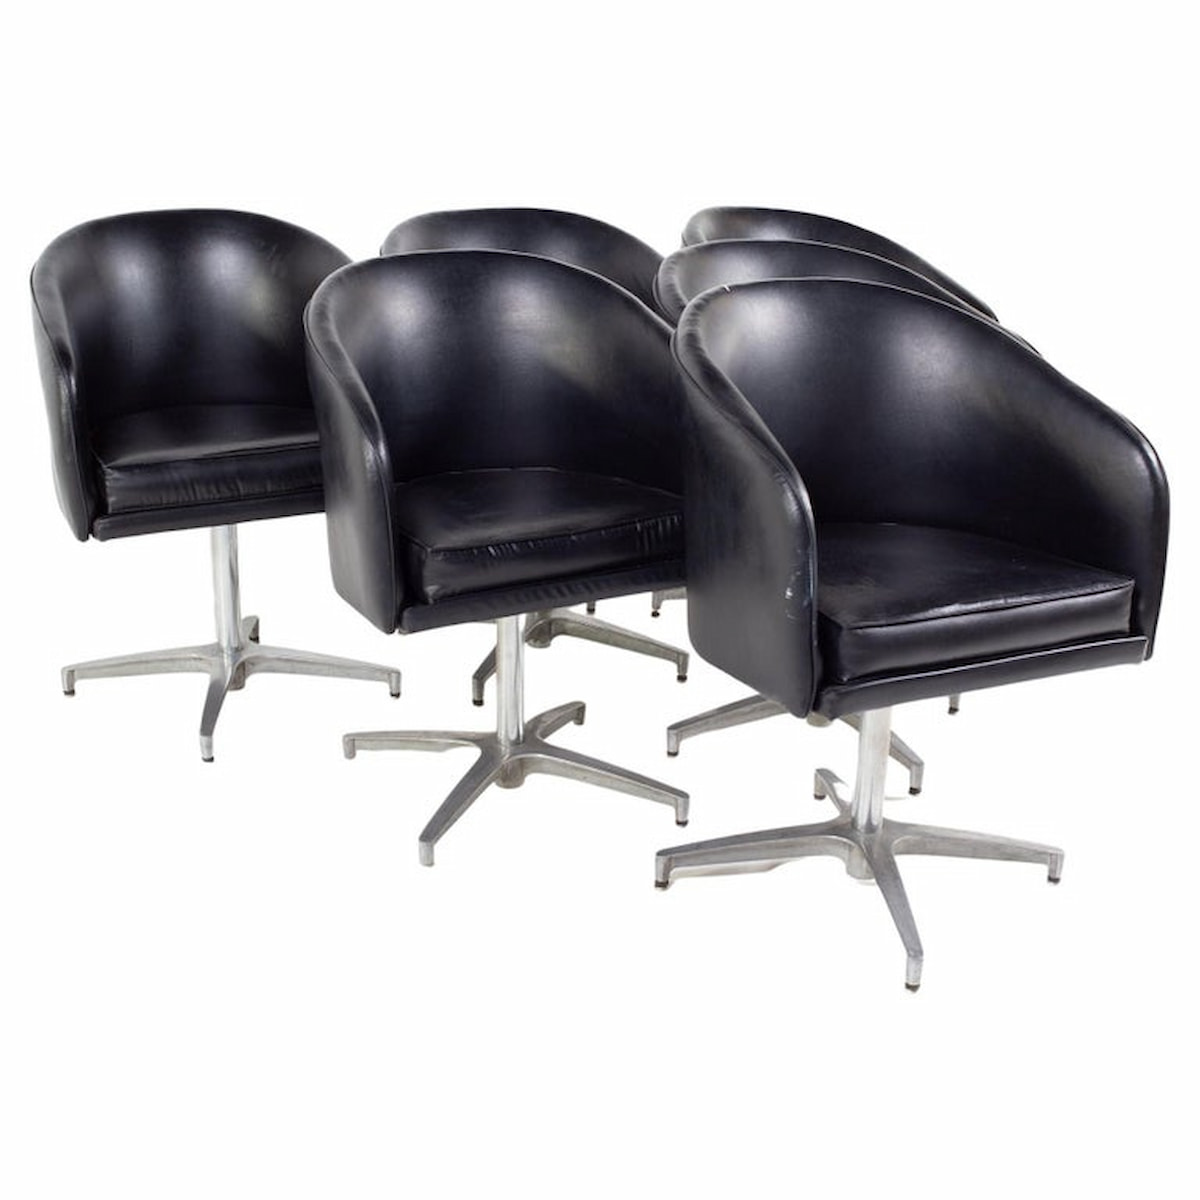 Overman Style Mid Century Black Vinyl Pod Occasional Lounge Chair - Set of 6